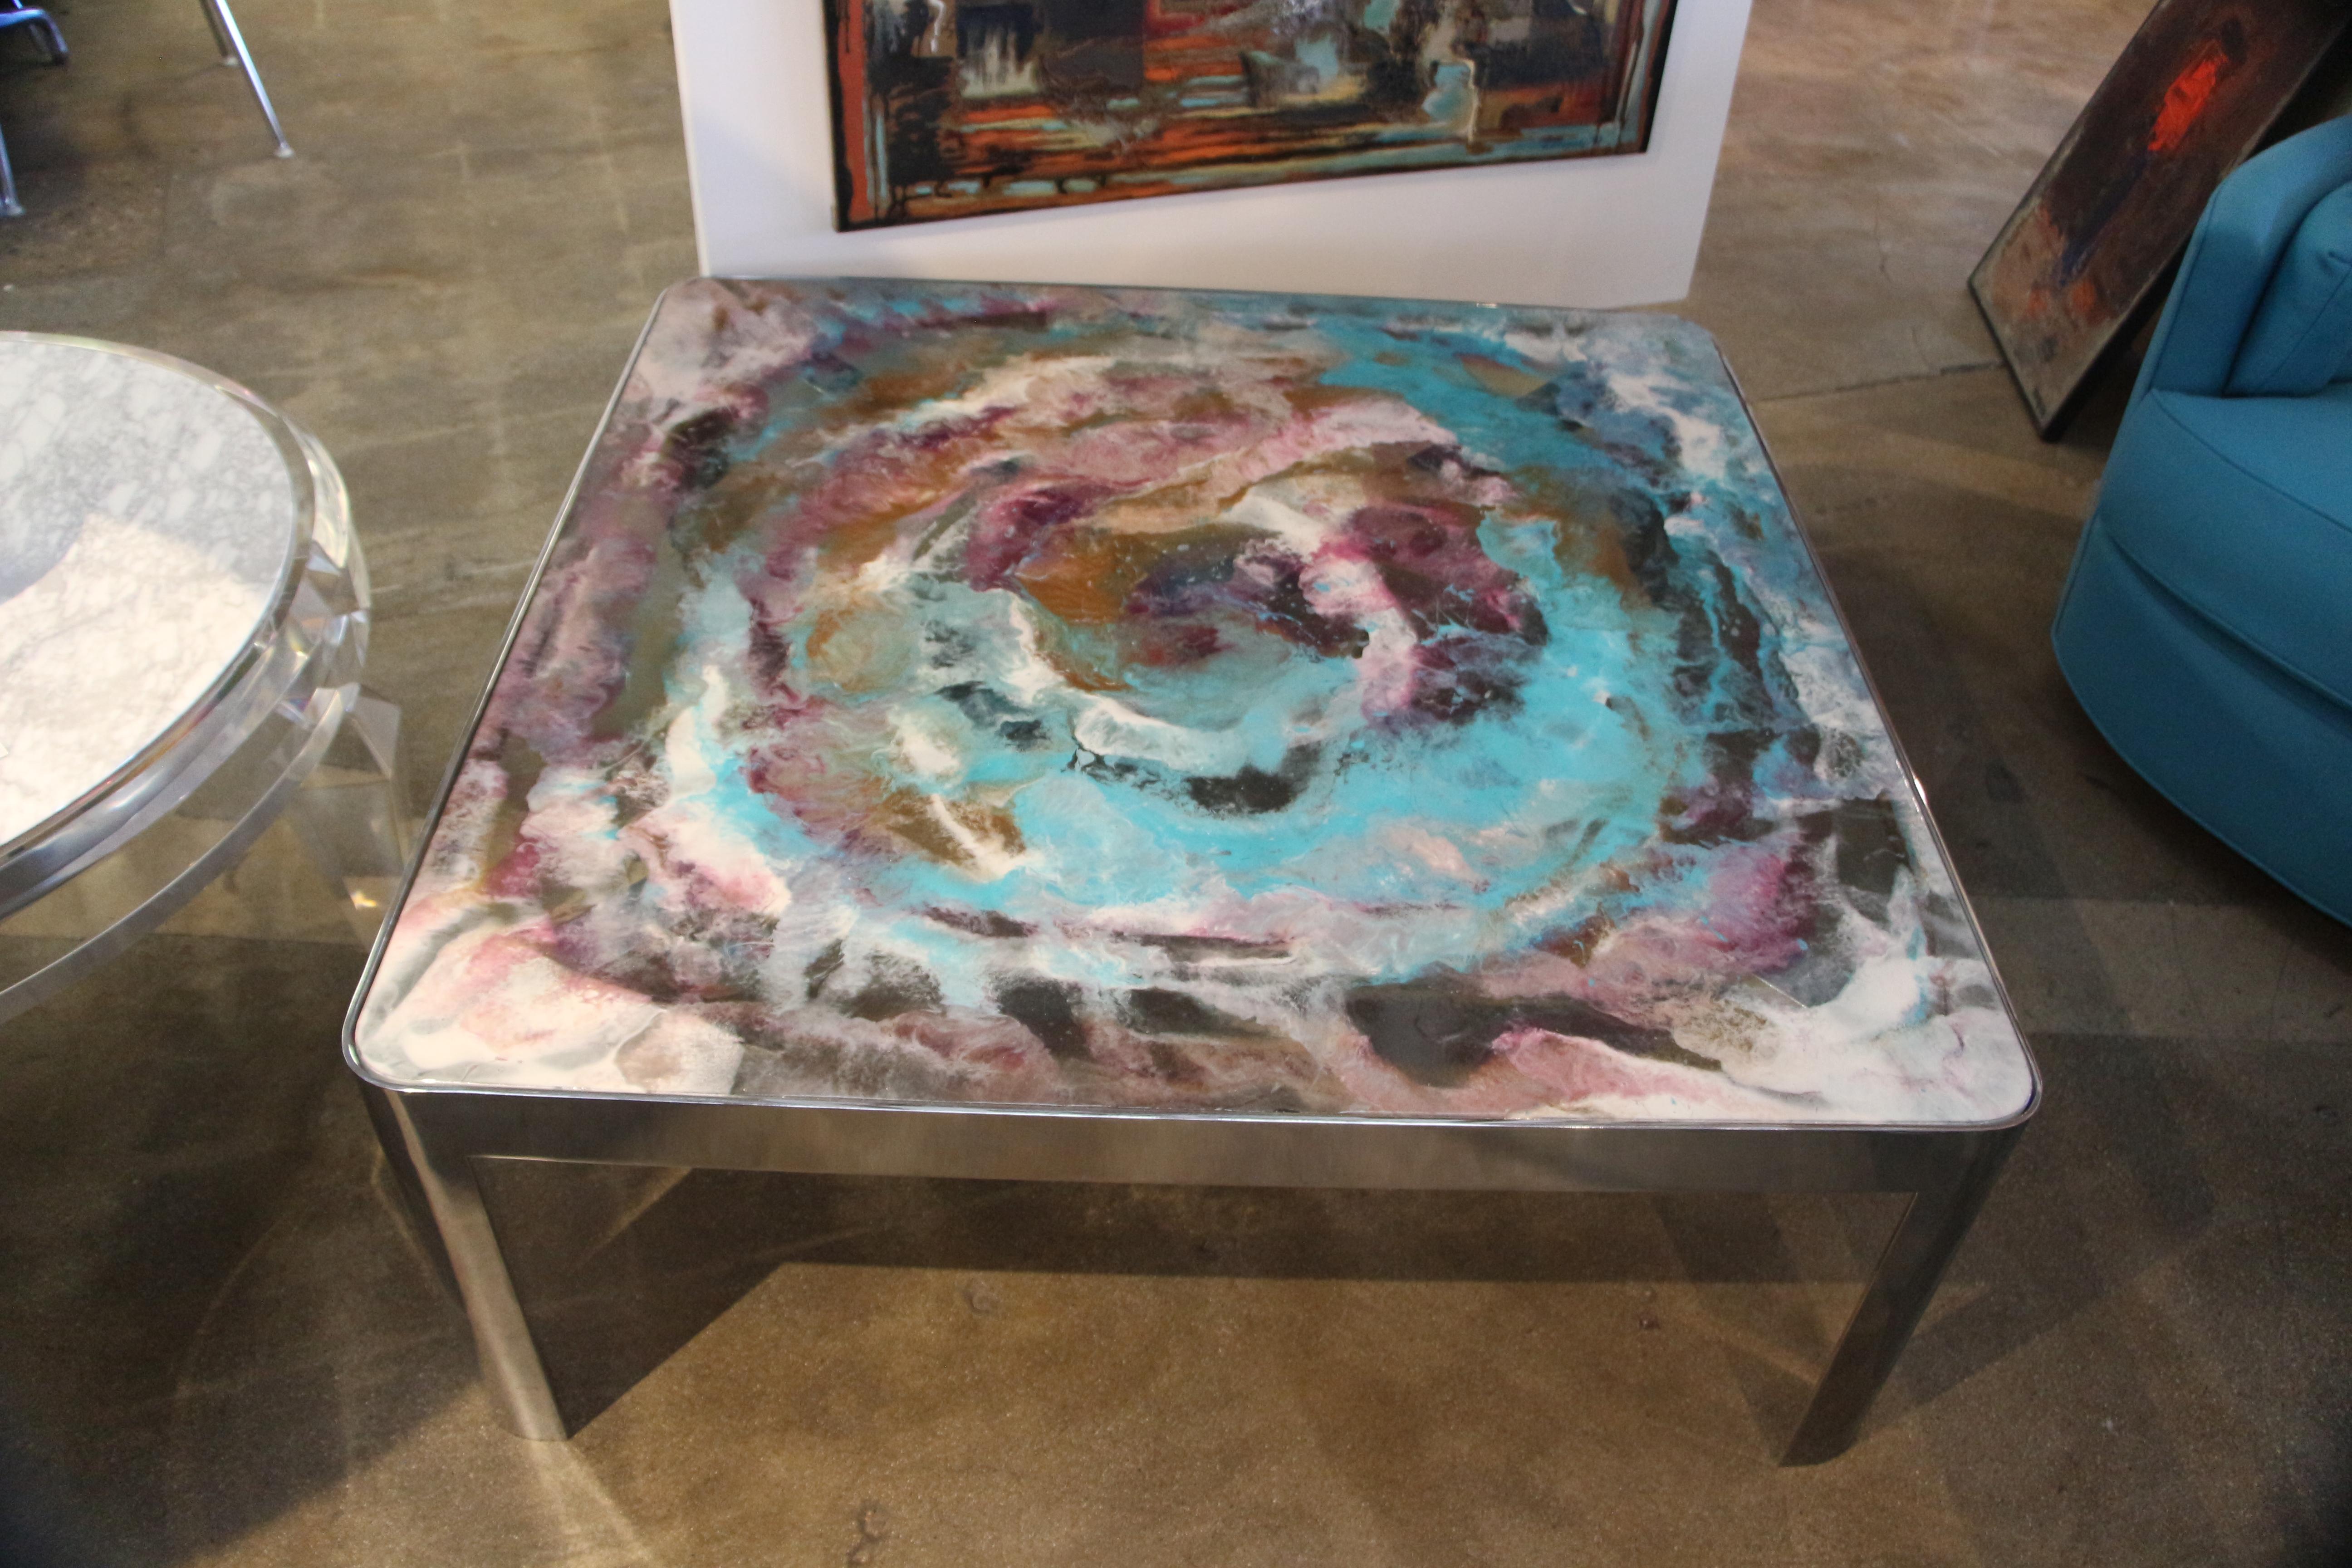 Artist, Marco Antonio, used the glass top of this table to paint a beautiful abstract. it is Epoxy paint decorated glass top on a Vintage 1980s chromed steel base. The abstract art top is colorful and vibrant.
There are some minor marks on the base